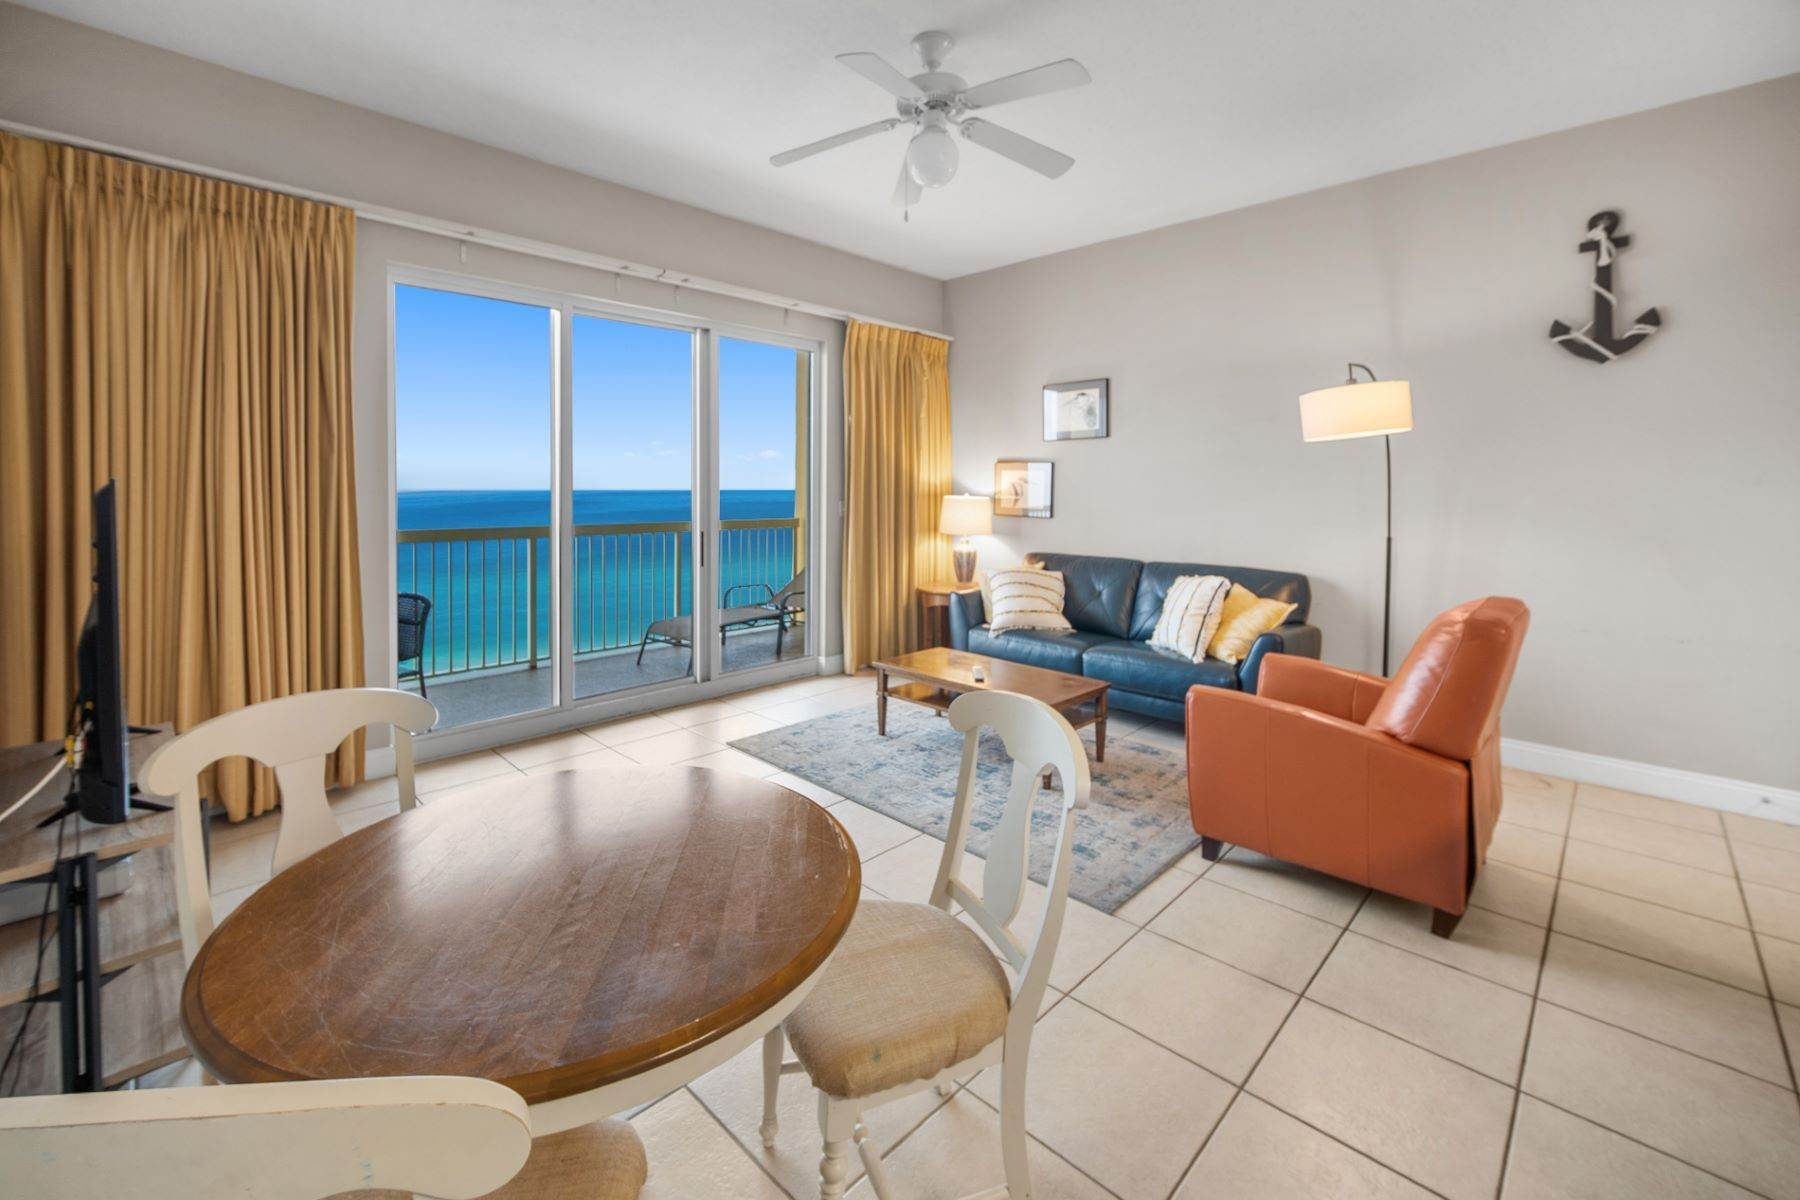 Condominiums for Sale at Attractive Gulf-Front Condo With Pool Near Pier Park Amenities 15817 Front Beach Road, 1-2303 Panama City Beach, Florida 32408 United States